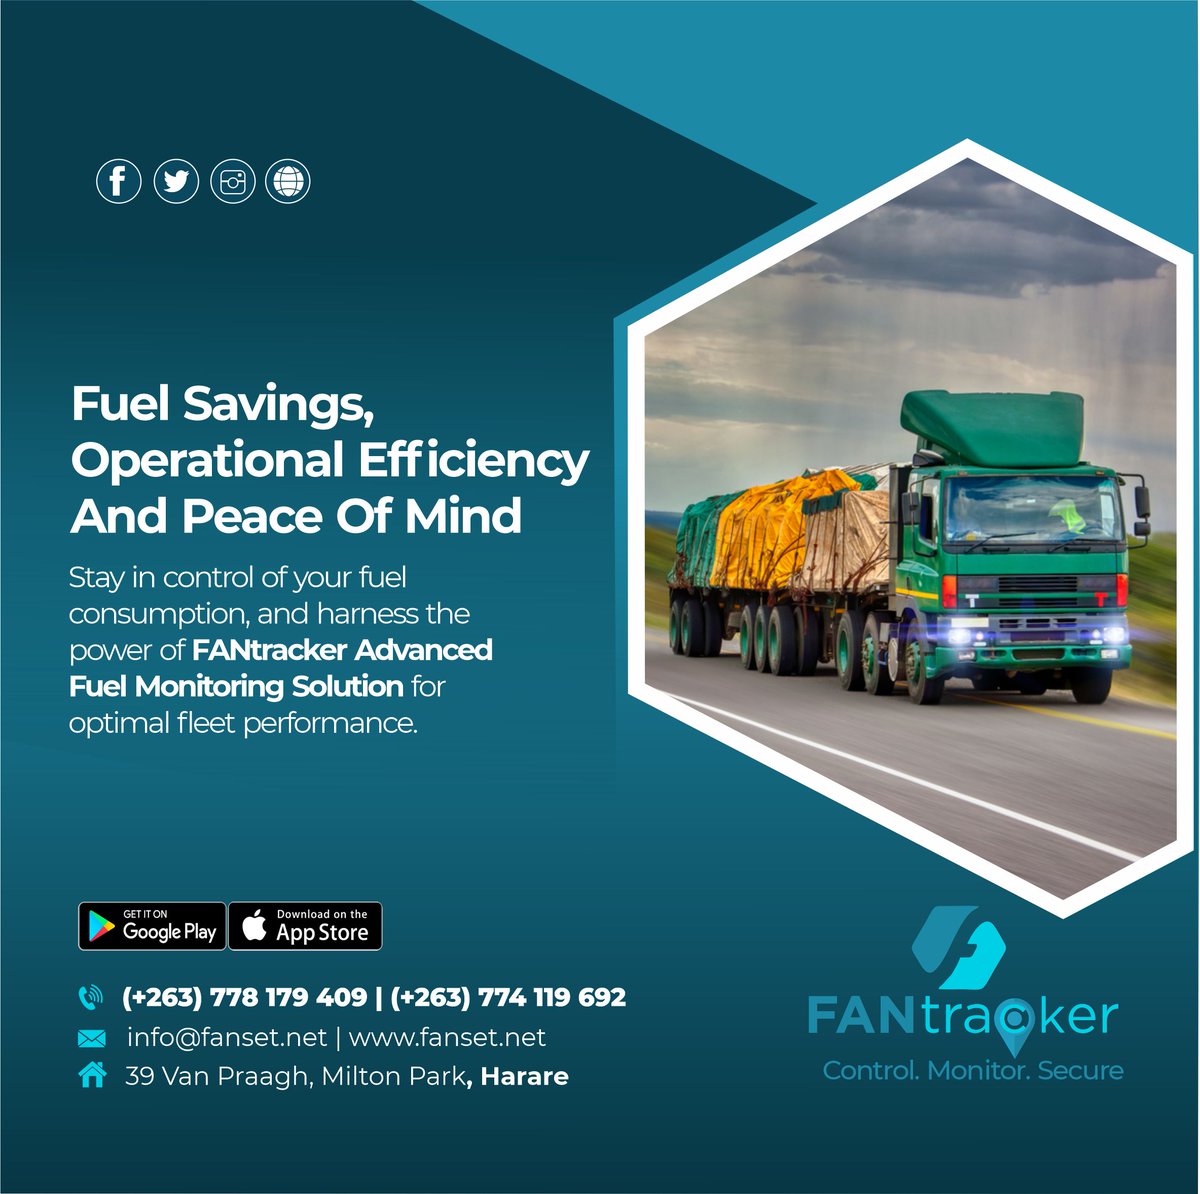 FUEL SAVINGS, OPERATIONAL EFFICIENCY & PEACE OF MIND. Stay in Control of Your Fuel Consumption, and Harness the Power of FANtracker Advanced Fuel Monitoring Solution for Optimal Fleet Performance. Contact us on: +263778179409/ 0774119692 #FANtracker #Fleetmanagement #Logistics